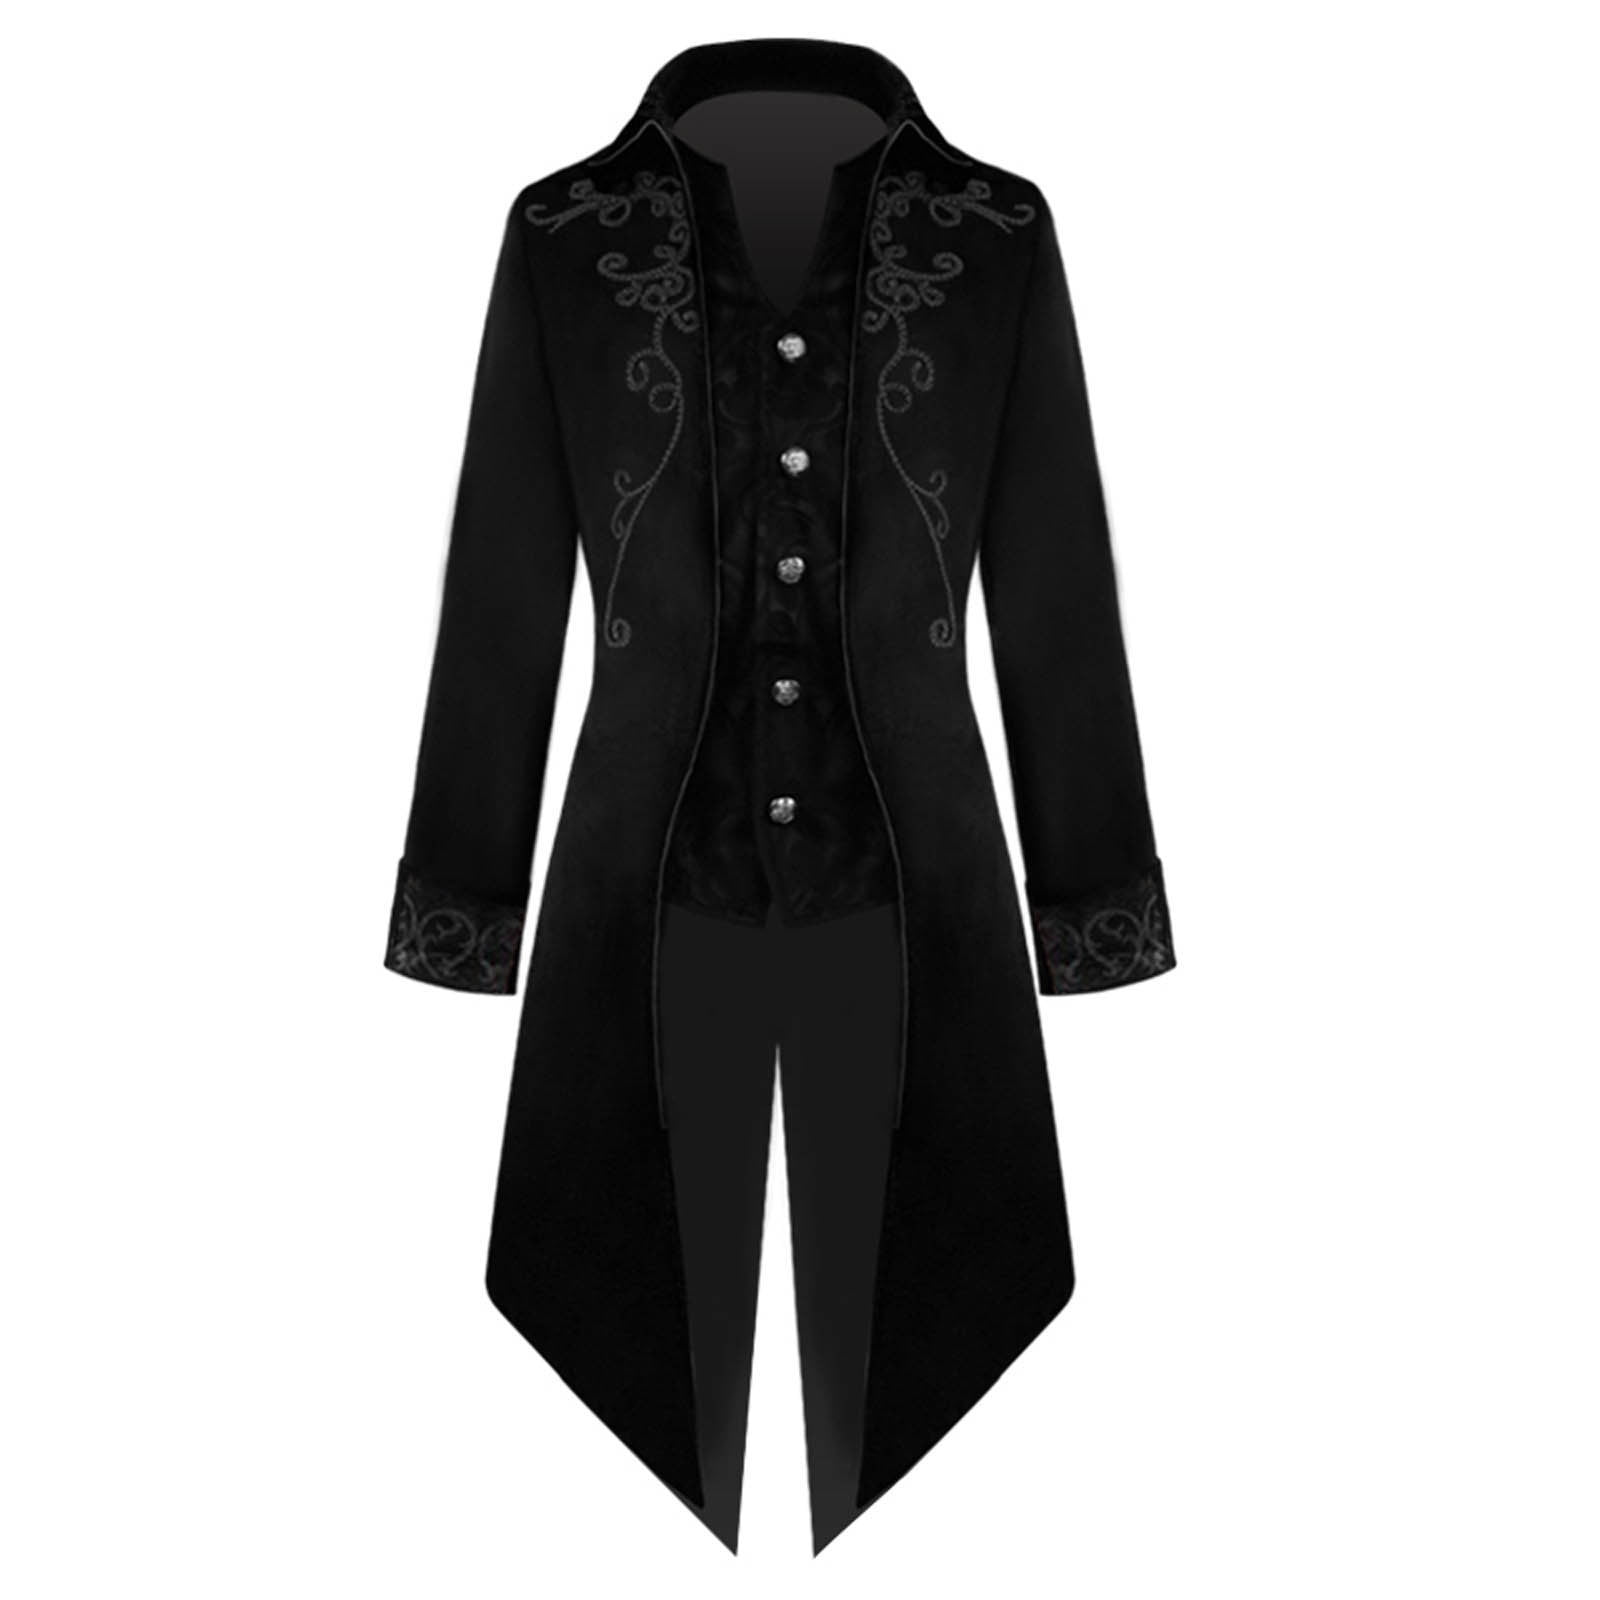 Men's Steampunk Trench Coat Victorian Slim Suit Collar Solid Double Breasted Zipper Coat